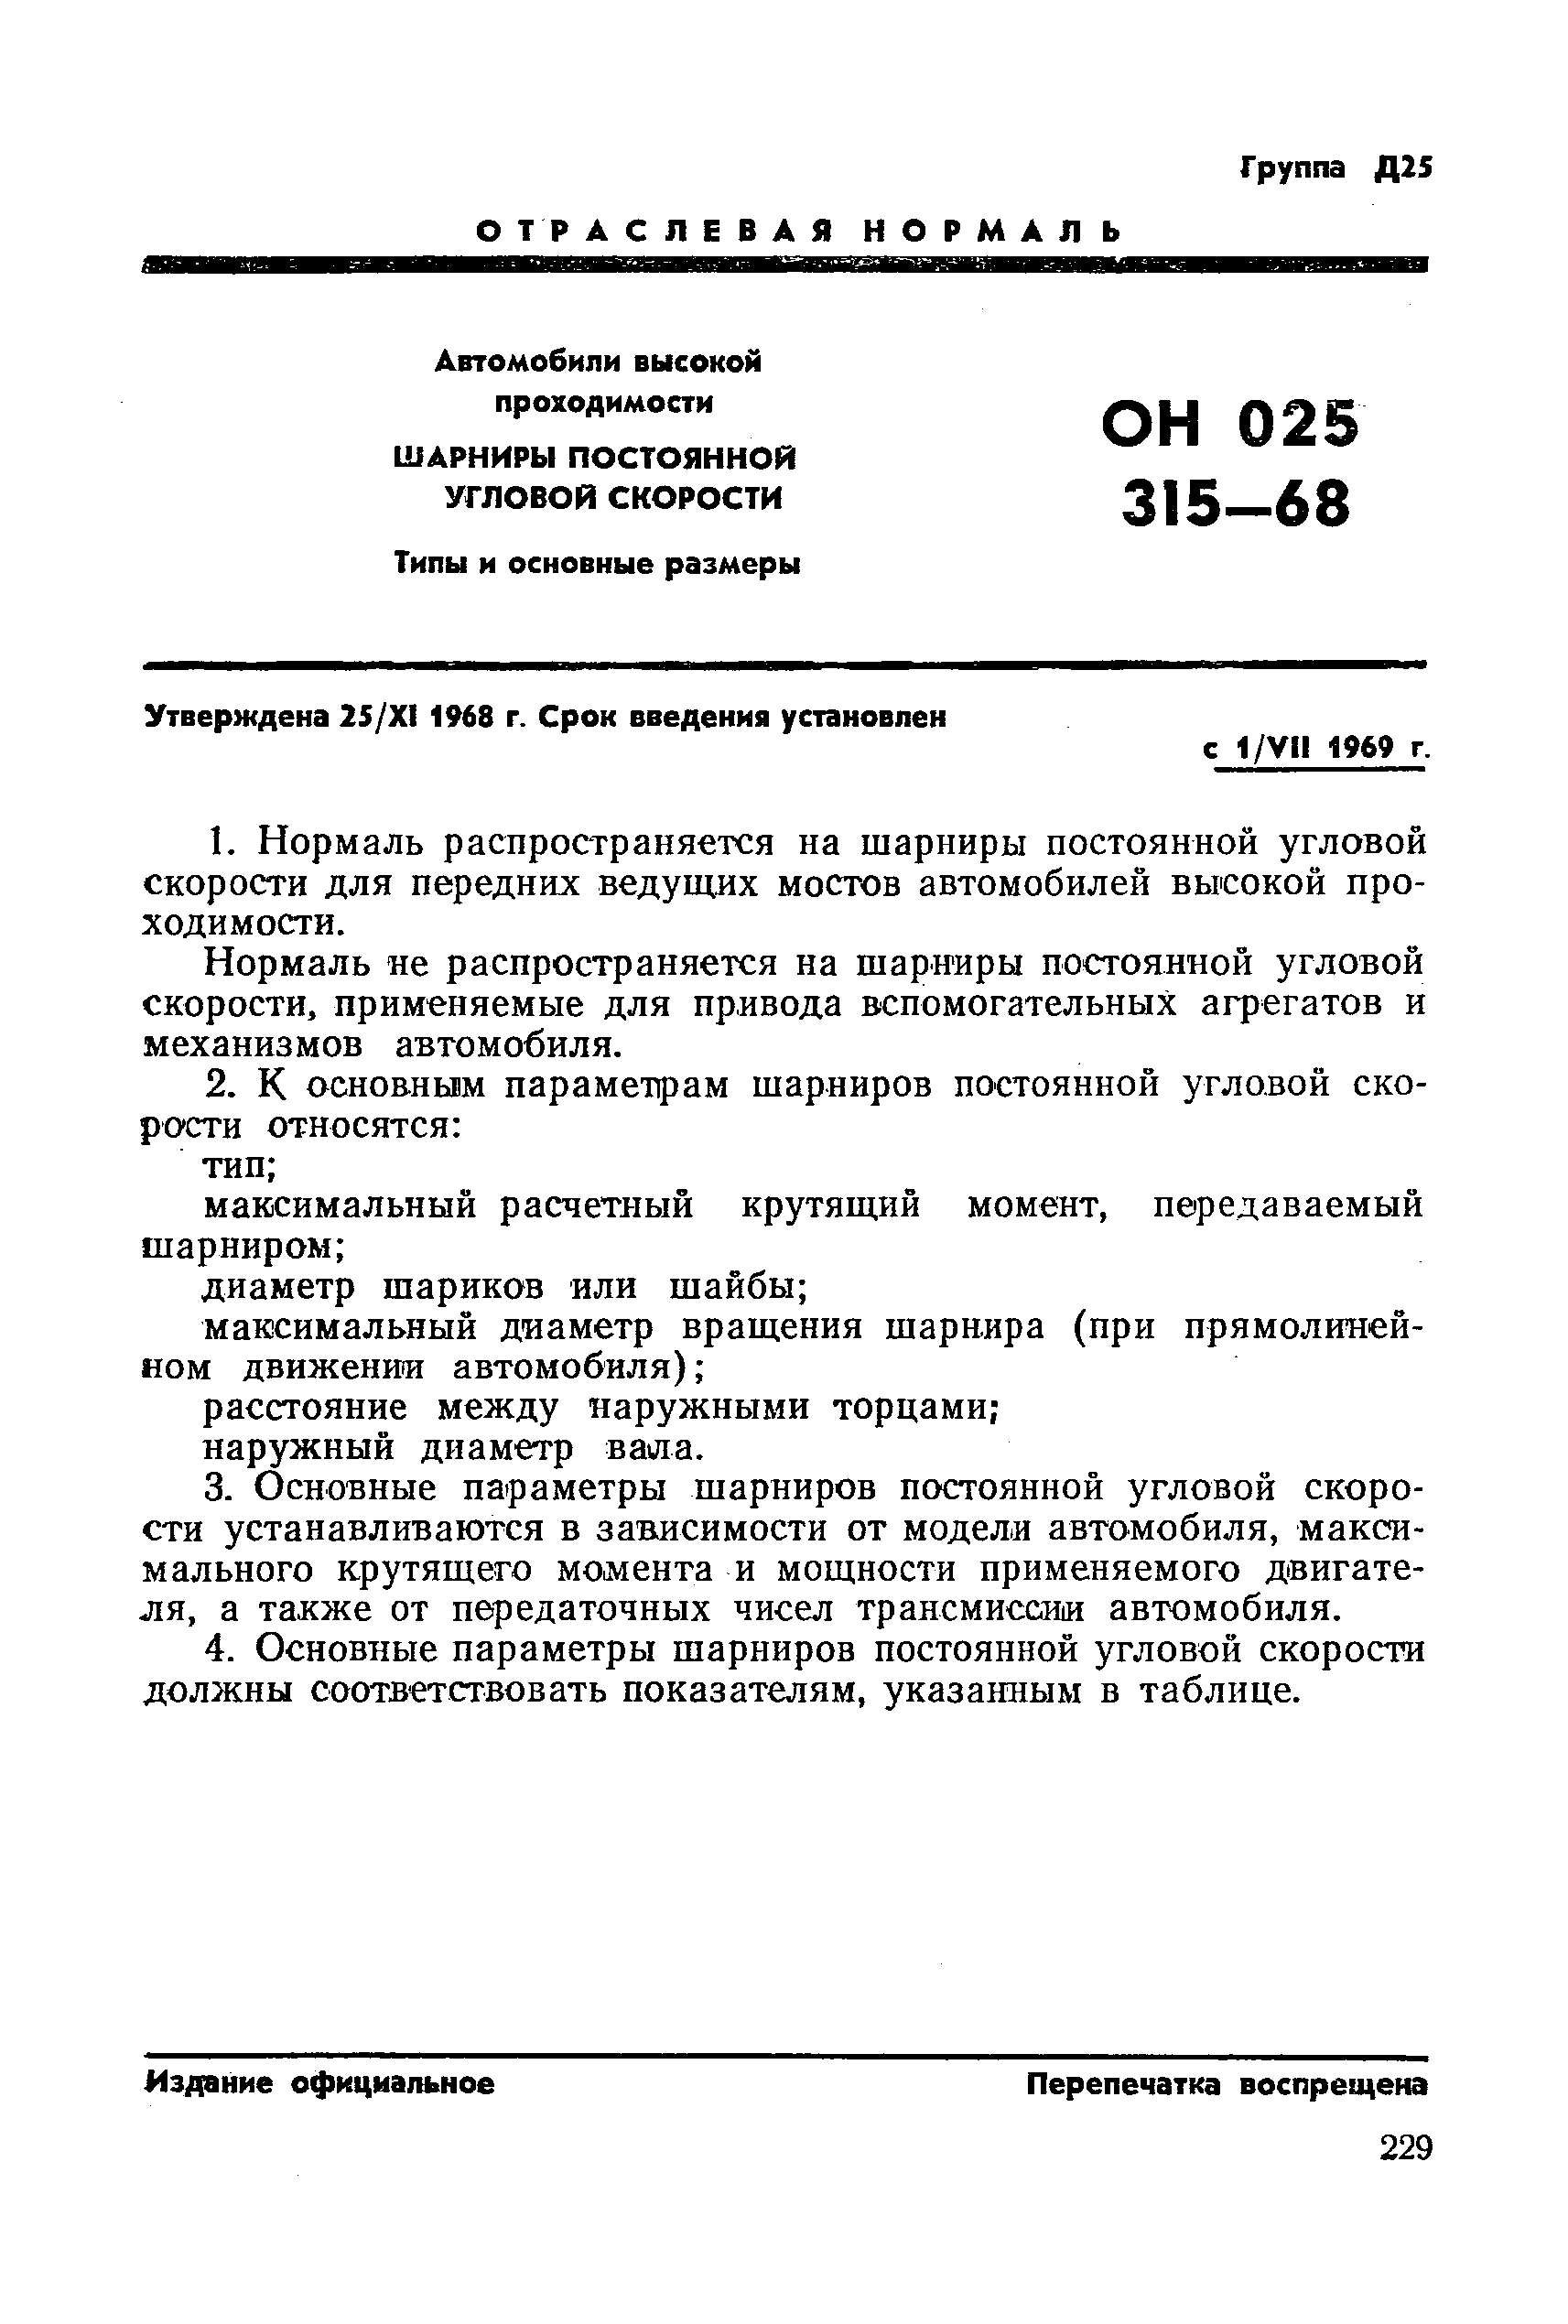 ОН 025 315-68